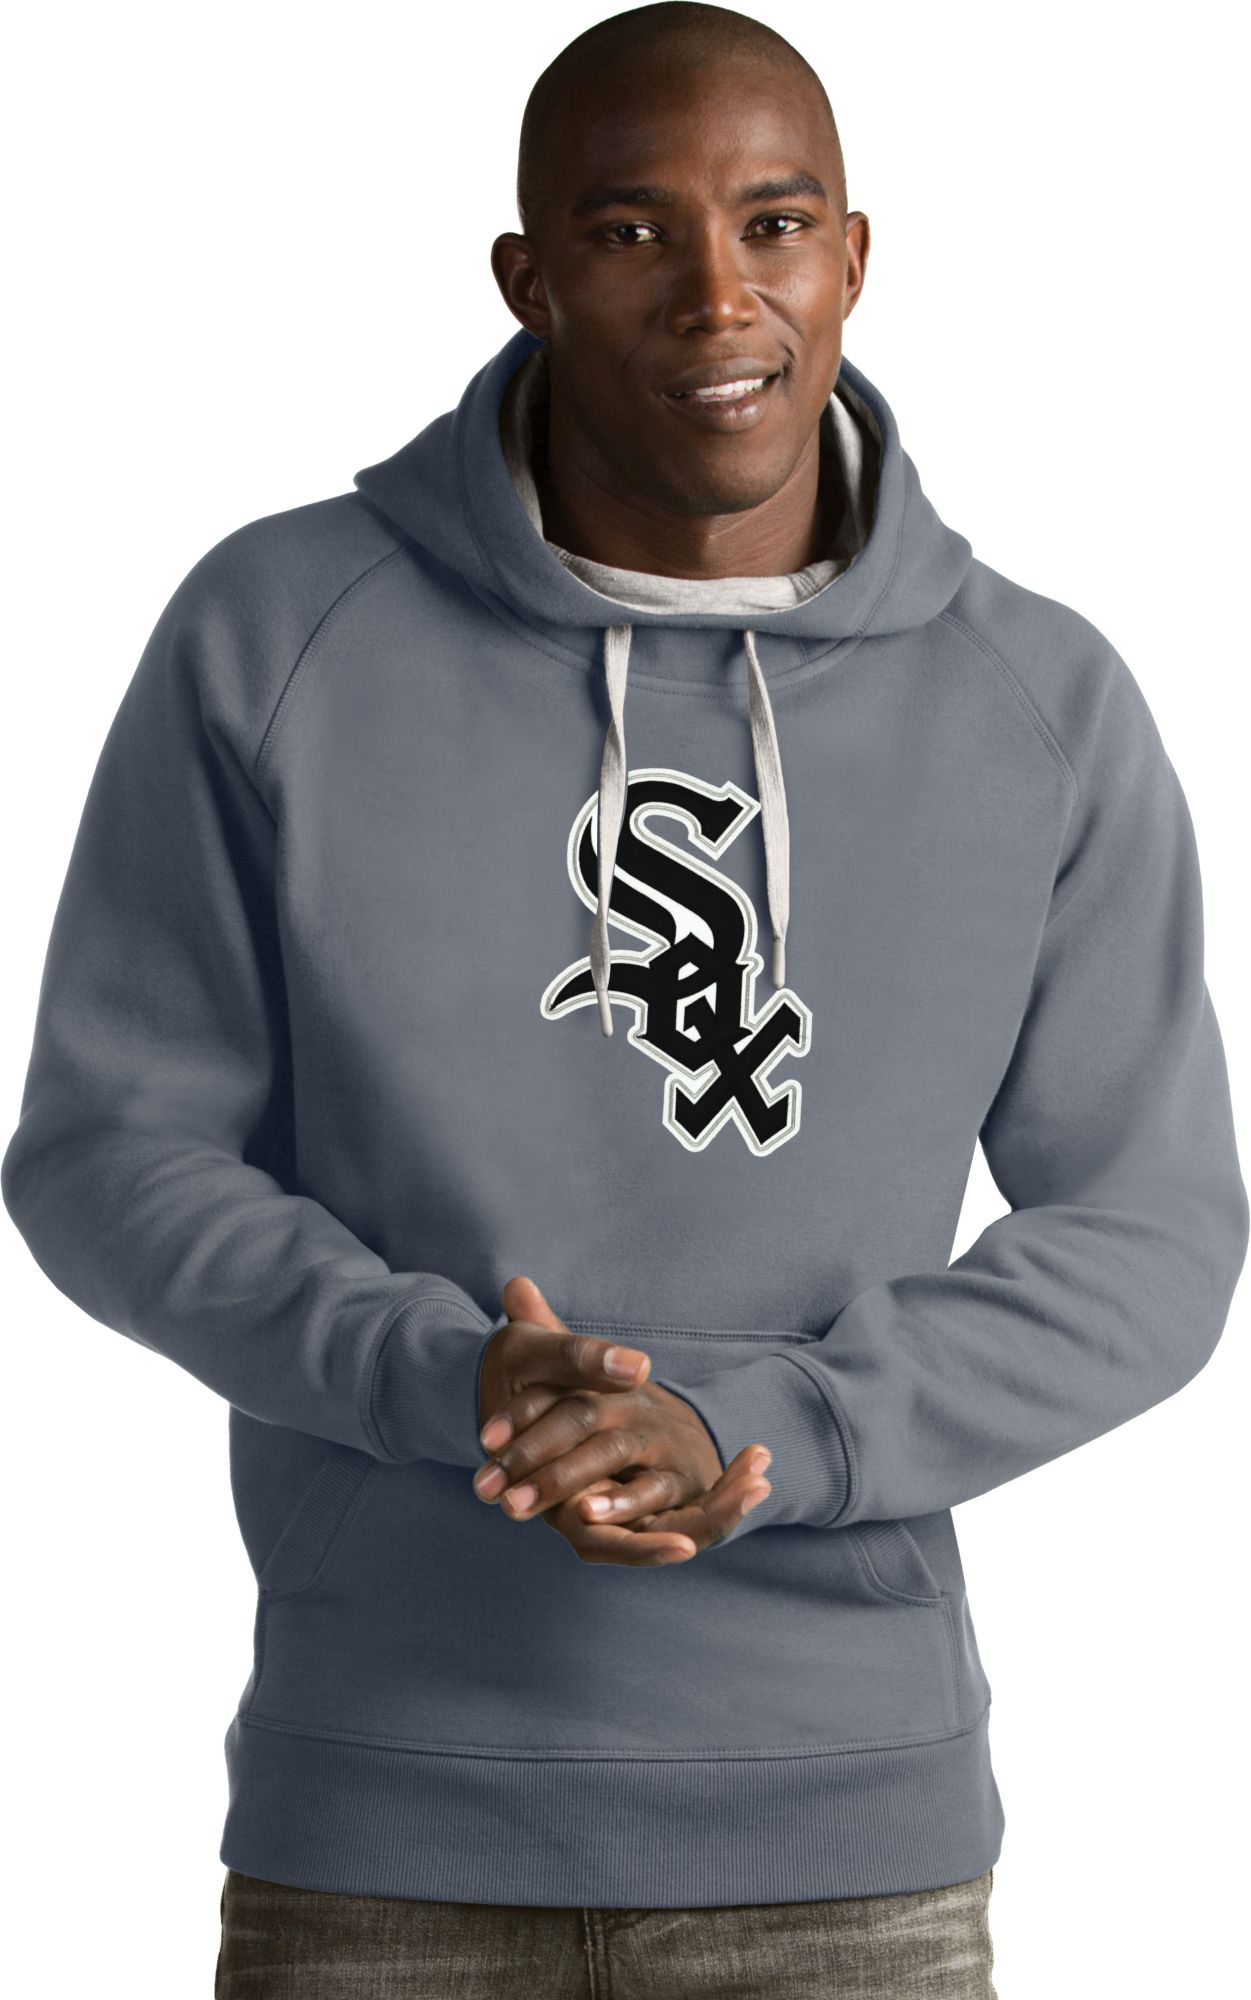 Luis Robert Chicago White Sox 2021 City Connect Replica Player Jersey -  Black/anthracite Mlb - Dingeas